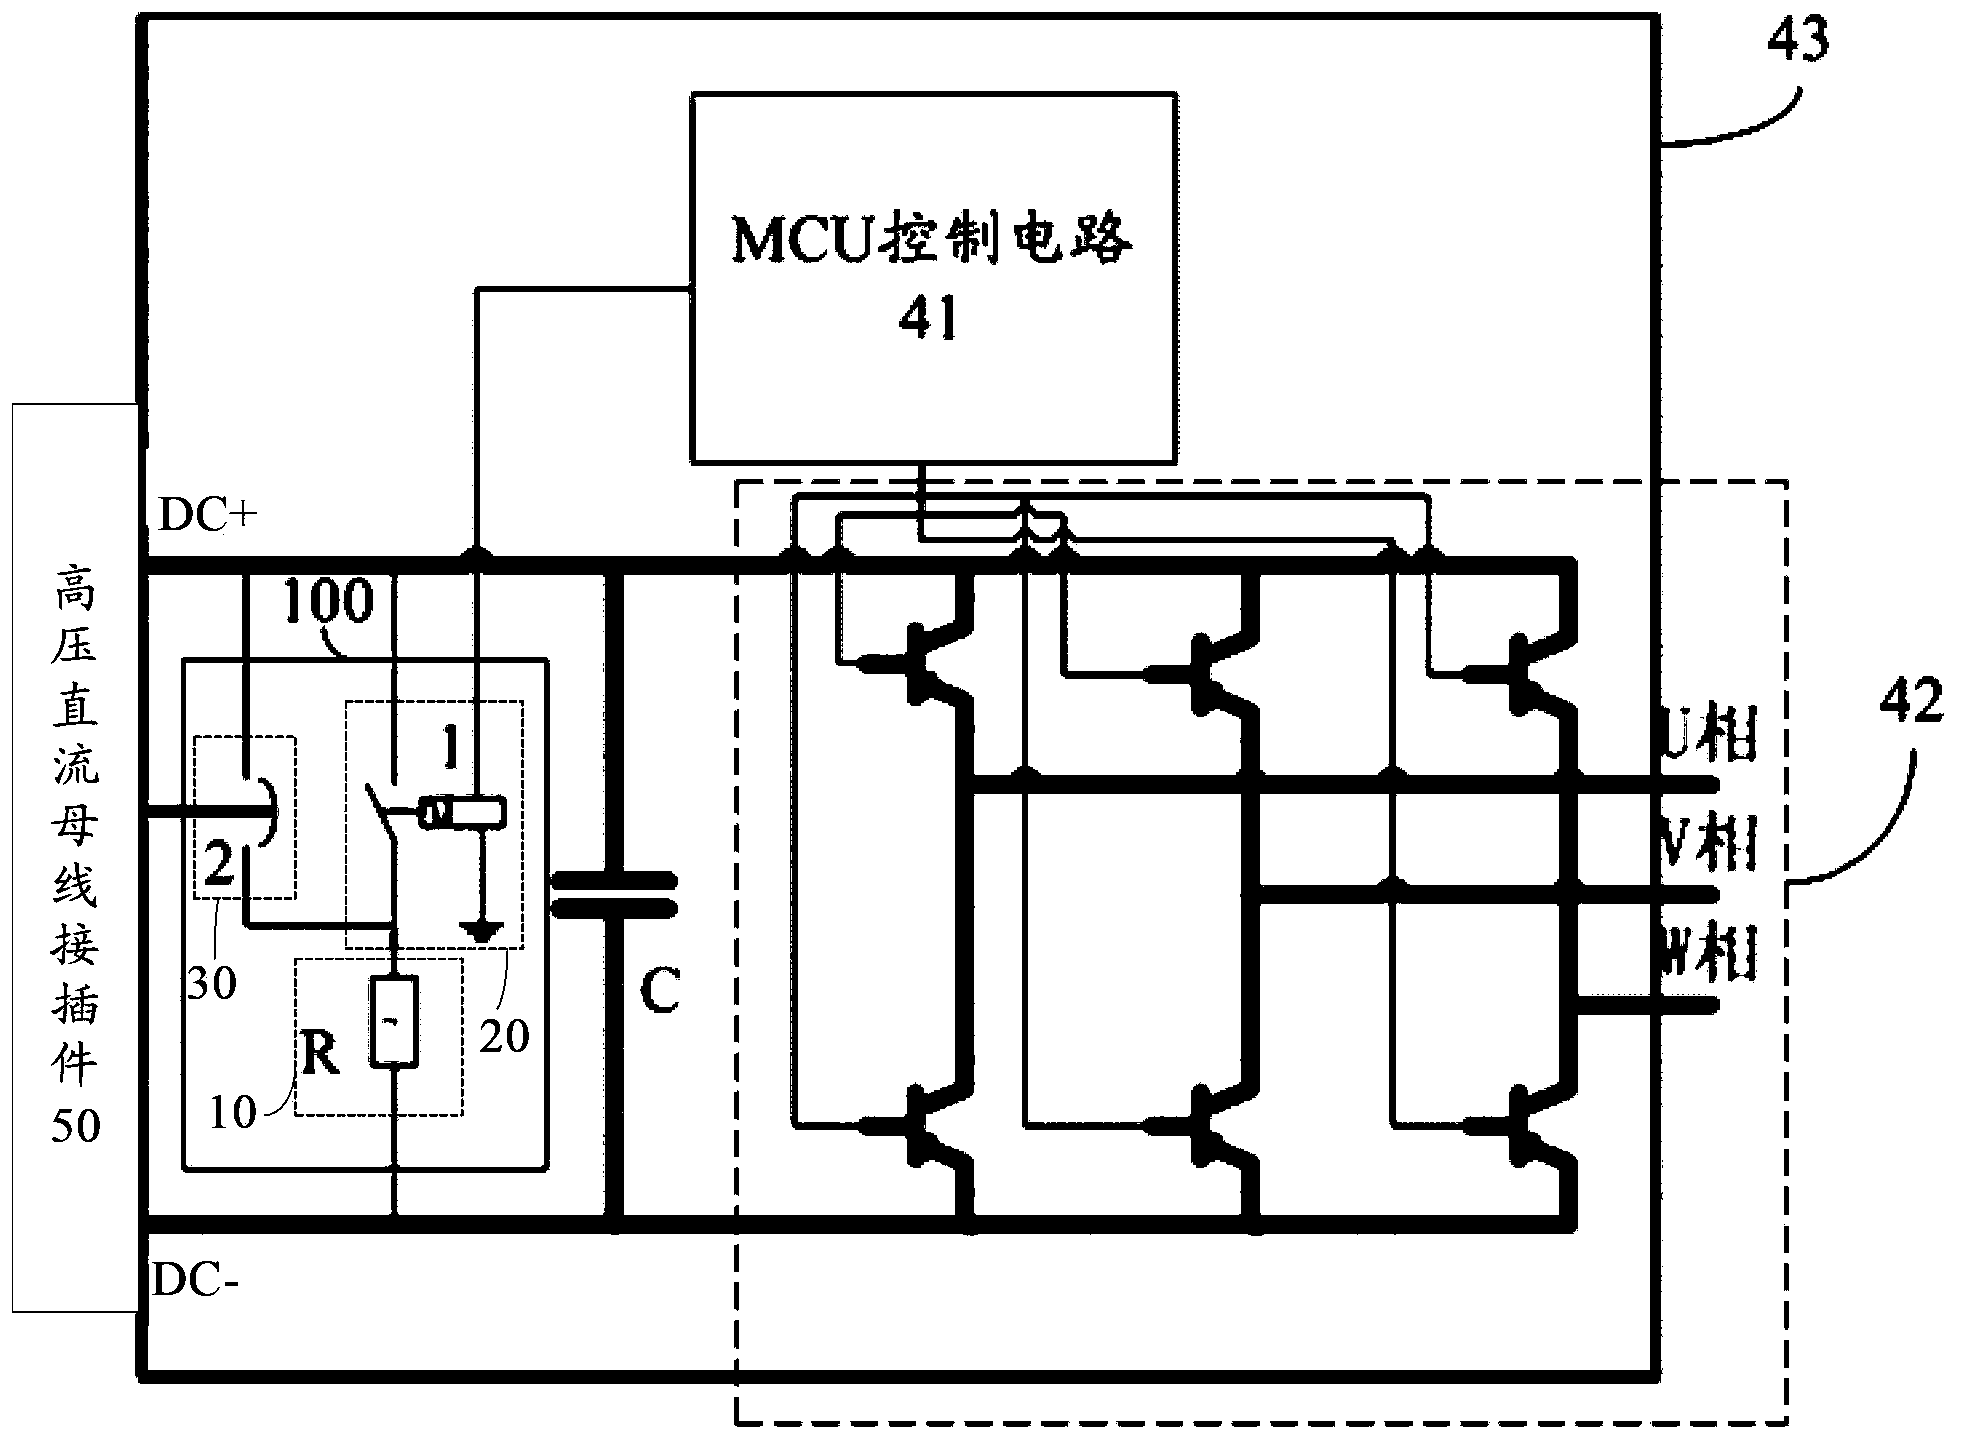 DC-bus-capacitor discharge device of motor controller used for electric vehicle and electric vehicle